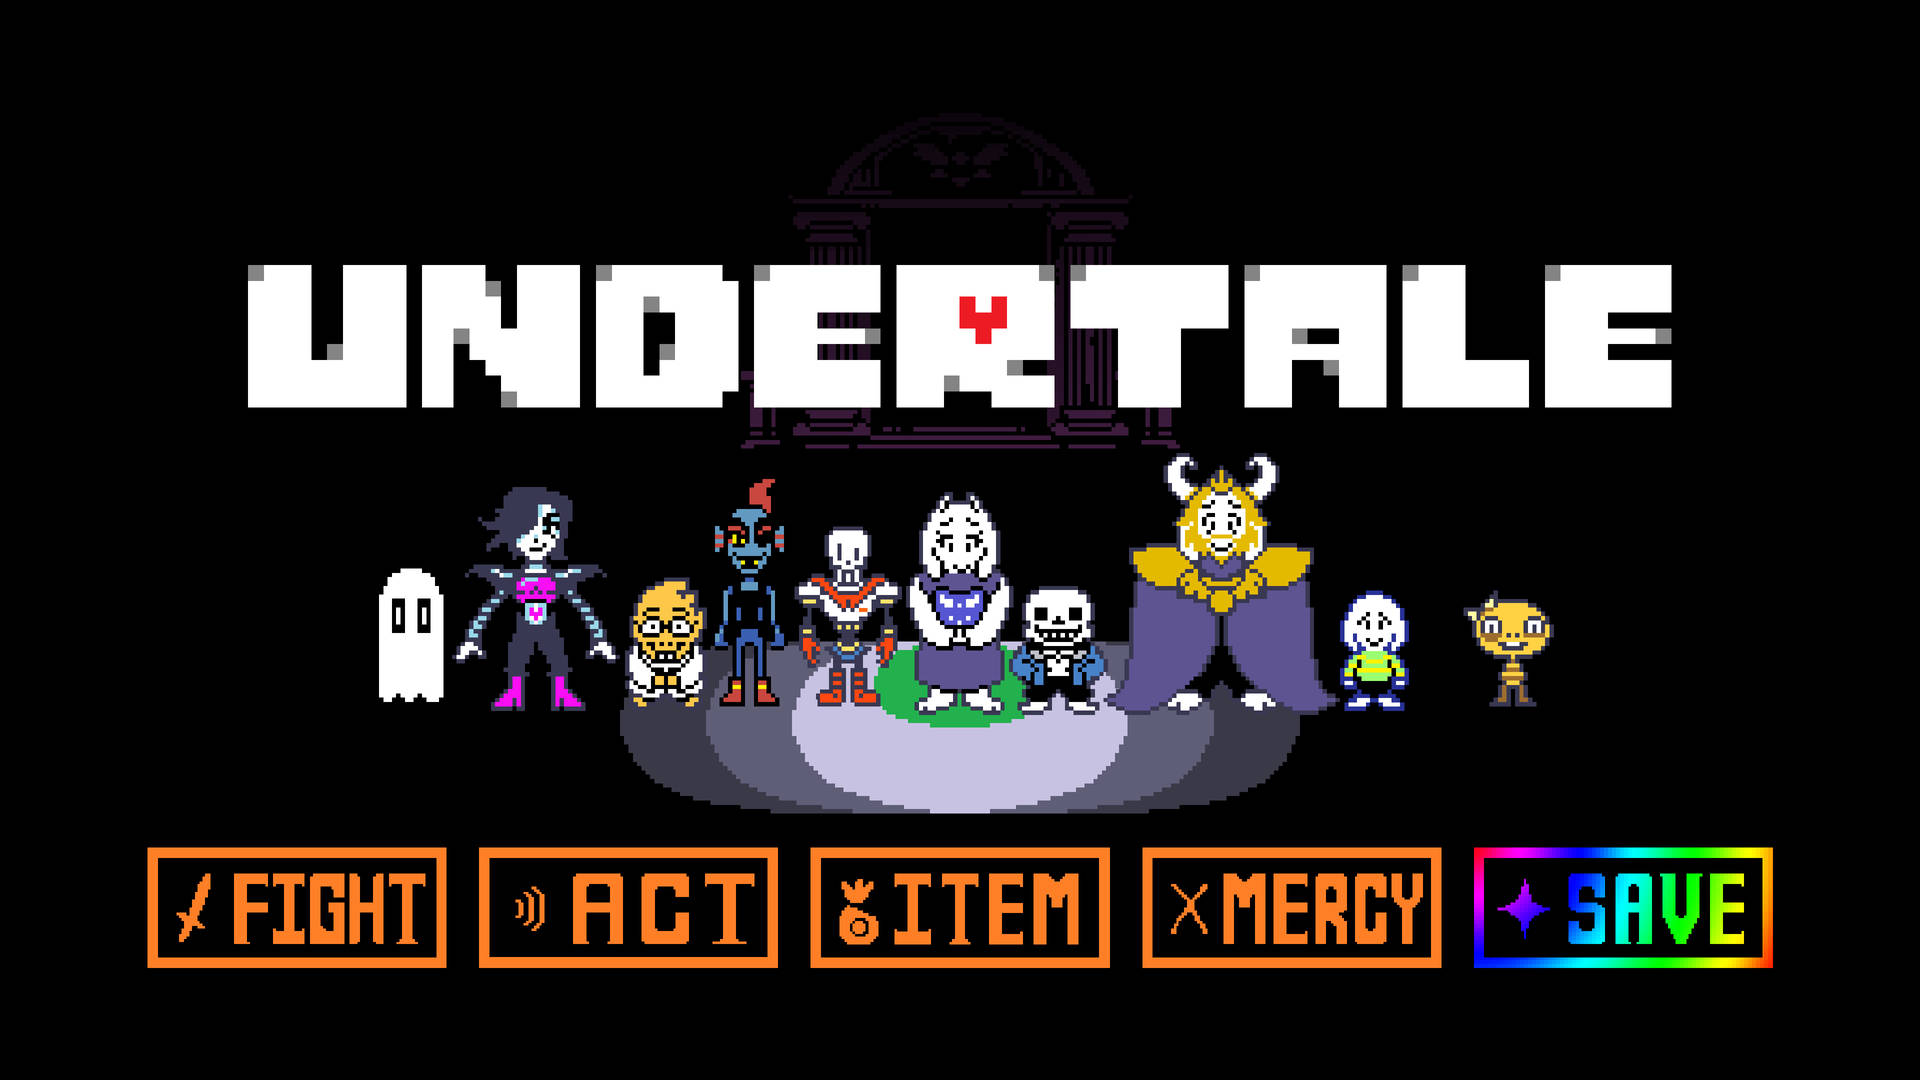 “Enjoy the adventure you are about to embark on with Undertale characters!” Wallpaper